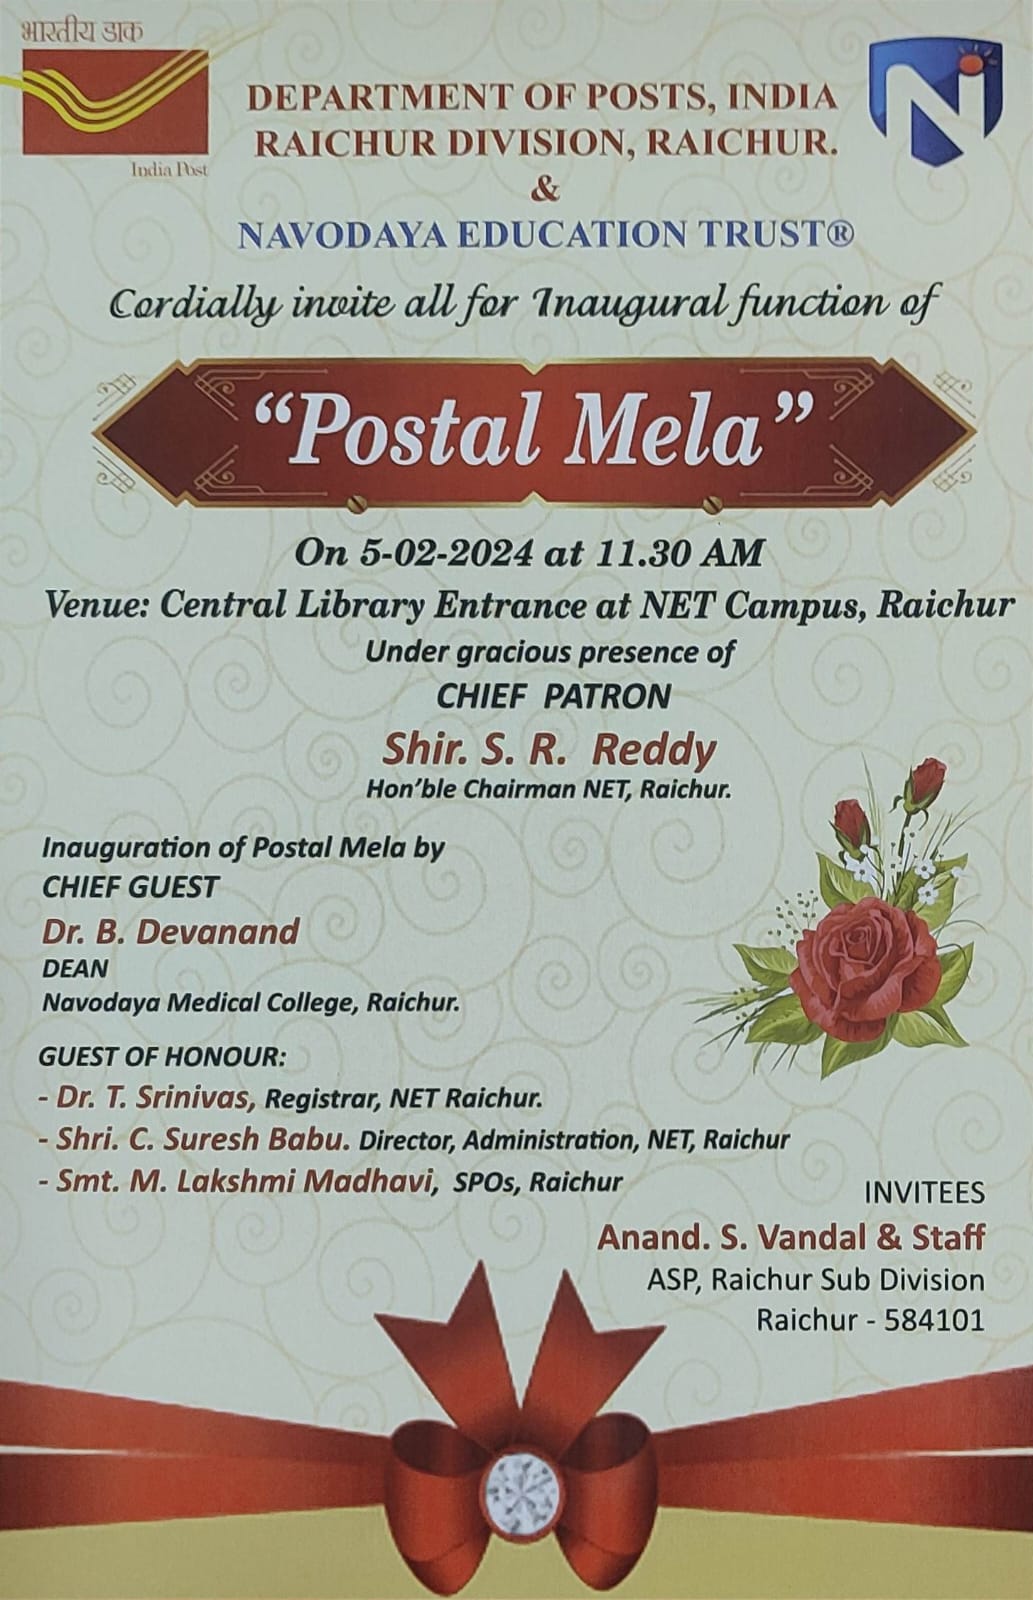 THE POST MELA Inaugural Function, Department of Posts ,India Raichur And Navodaya Education Trust, took place on February 5,2024 at Central Library Entrance of NET Campus in Raichur.